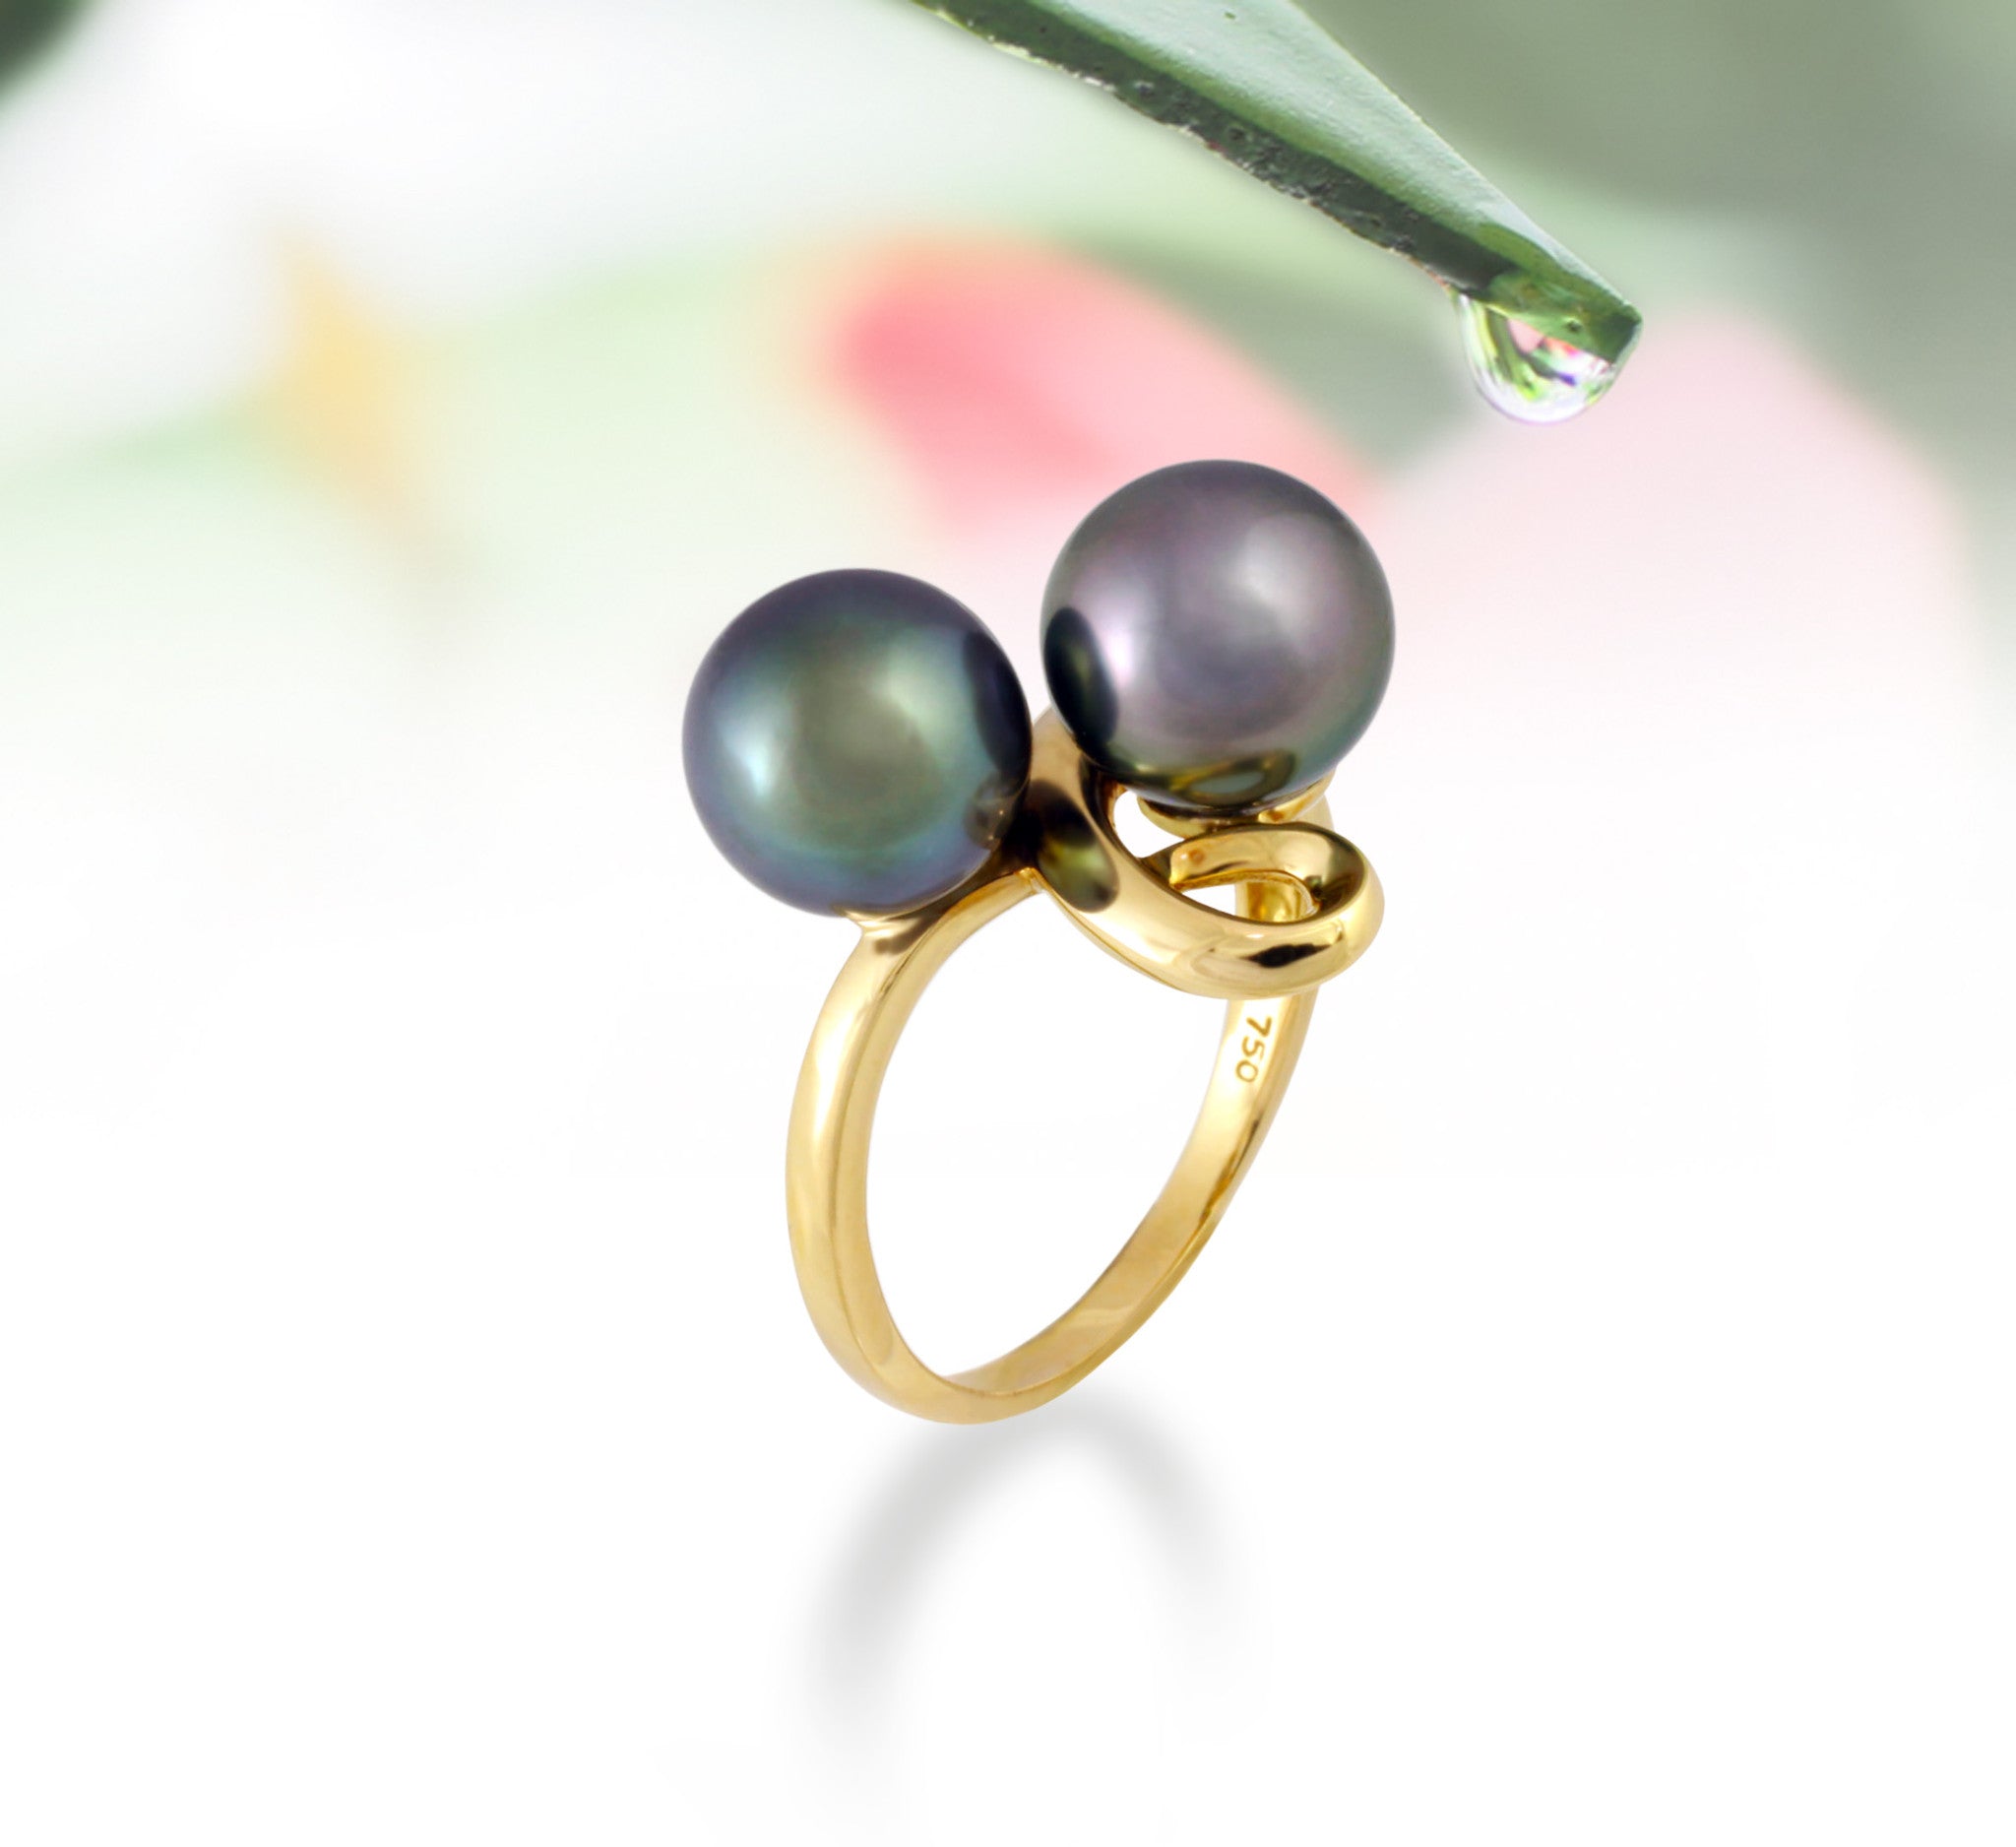 TAHITIAN CULTURED PEARL RING It is decorated with a Tahi… | Drouot.com